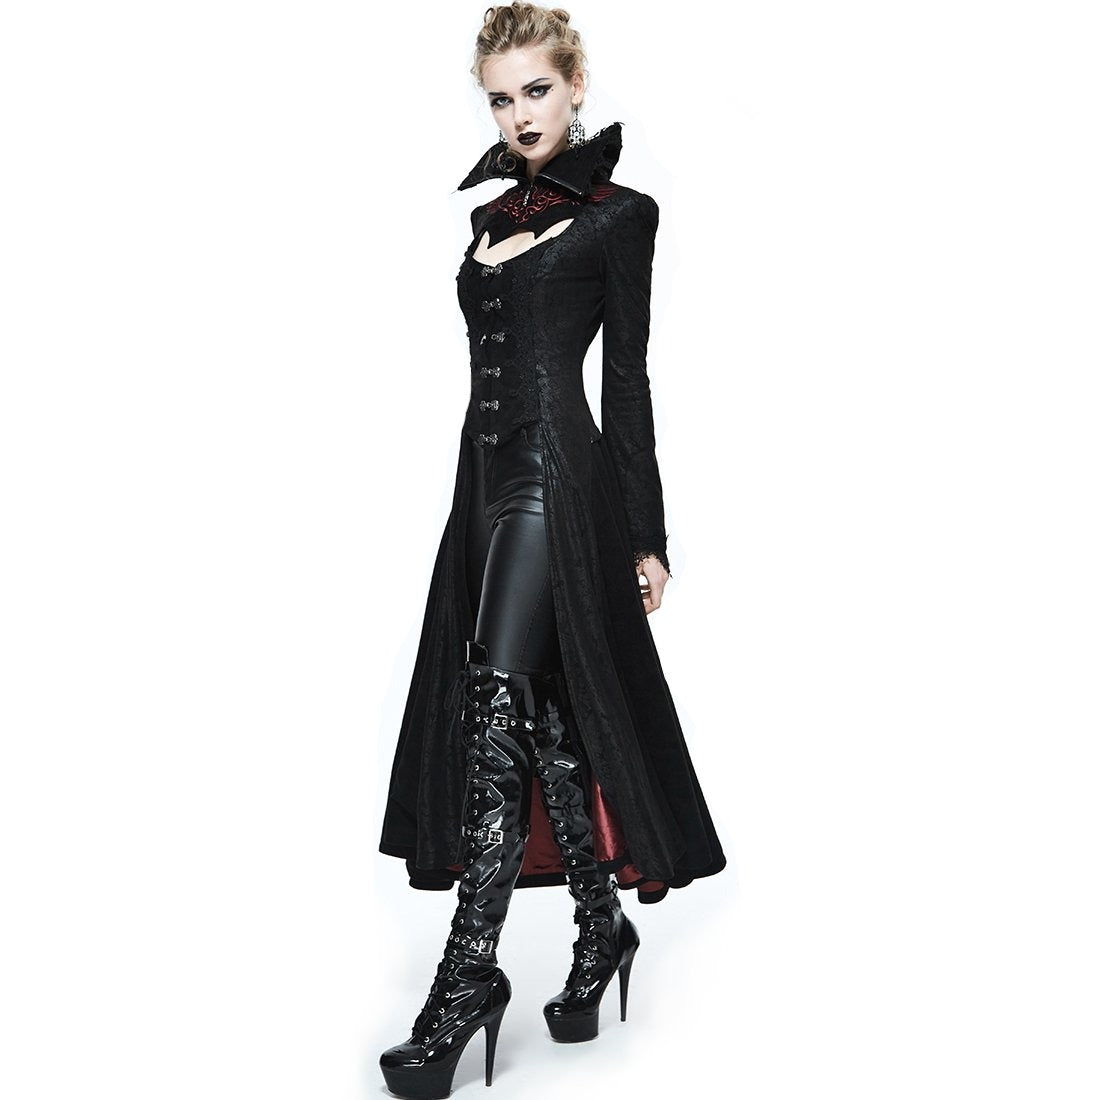 Black Embossed Long Coat in Gothic Style / Sexy High Collar Long Top / Alternative Fashion Outwear - HARD'N'HEAVY